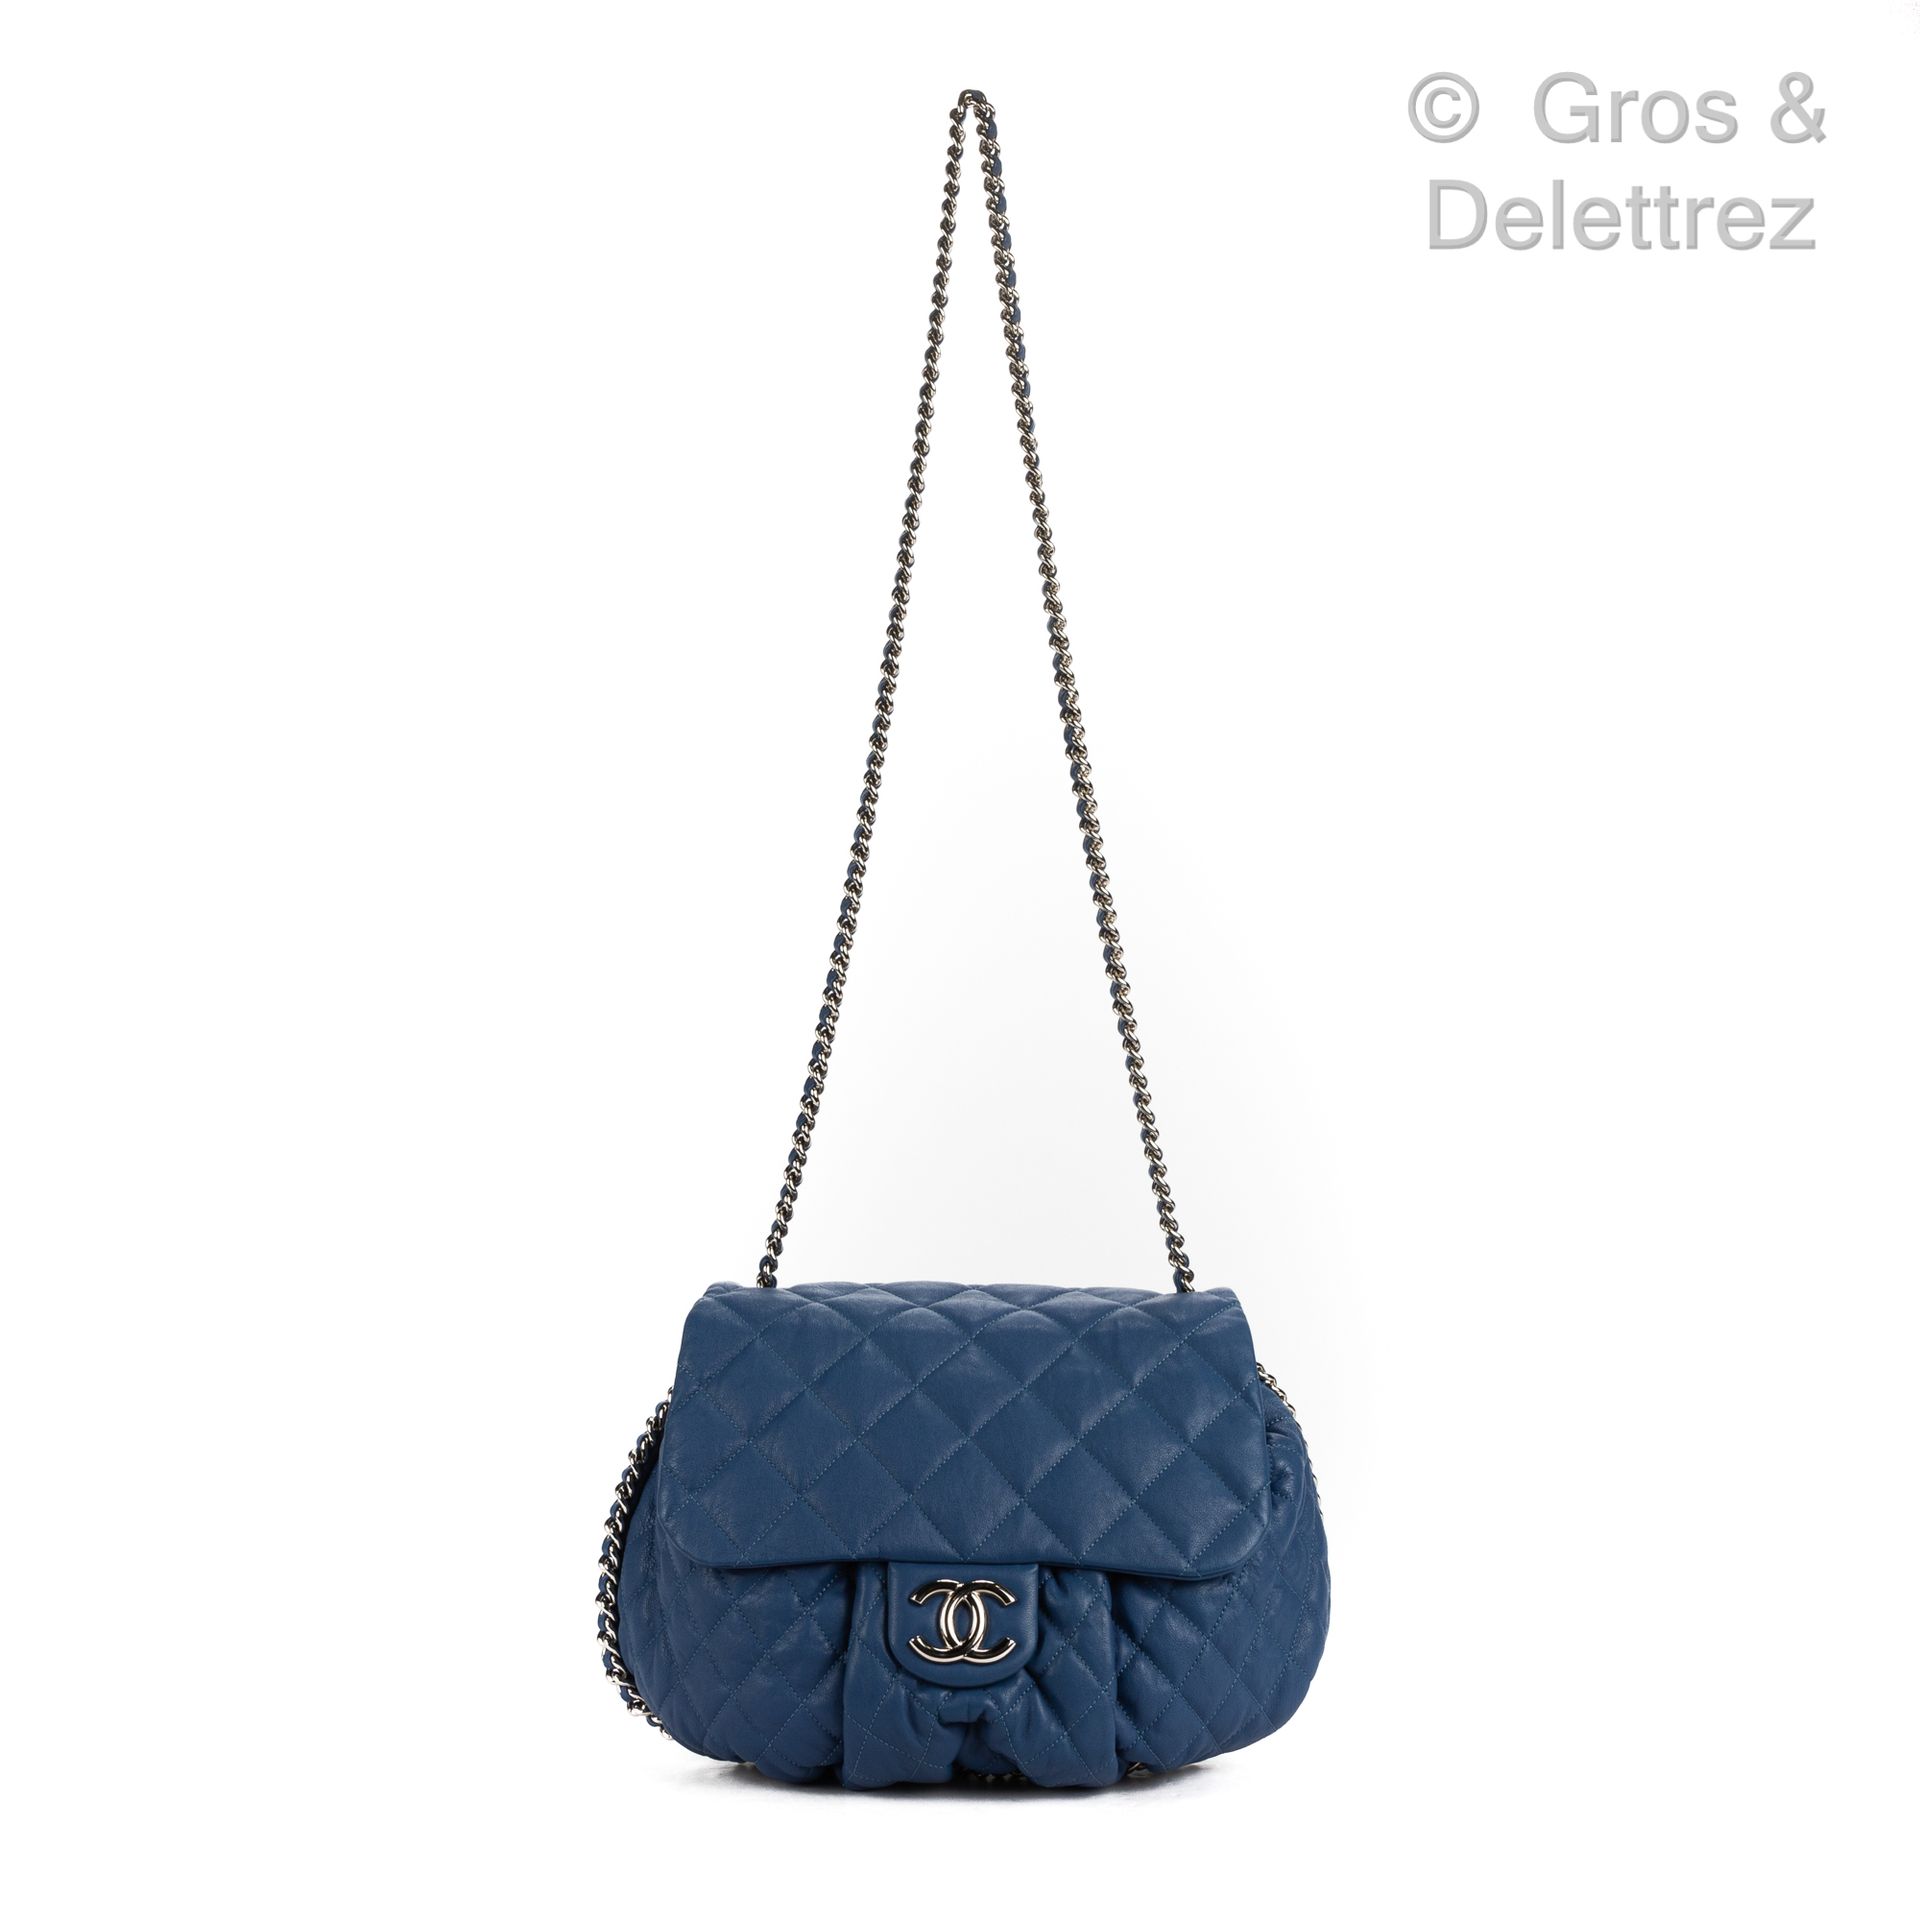 CHANEL Circa 2011

33 cm bag in denim blue lambskin embellished with a coordinat&hellip;